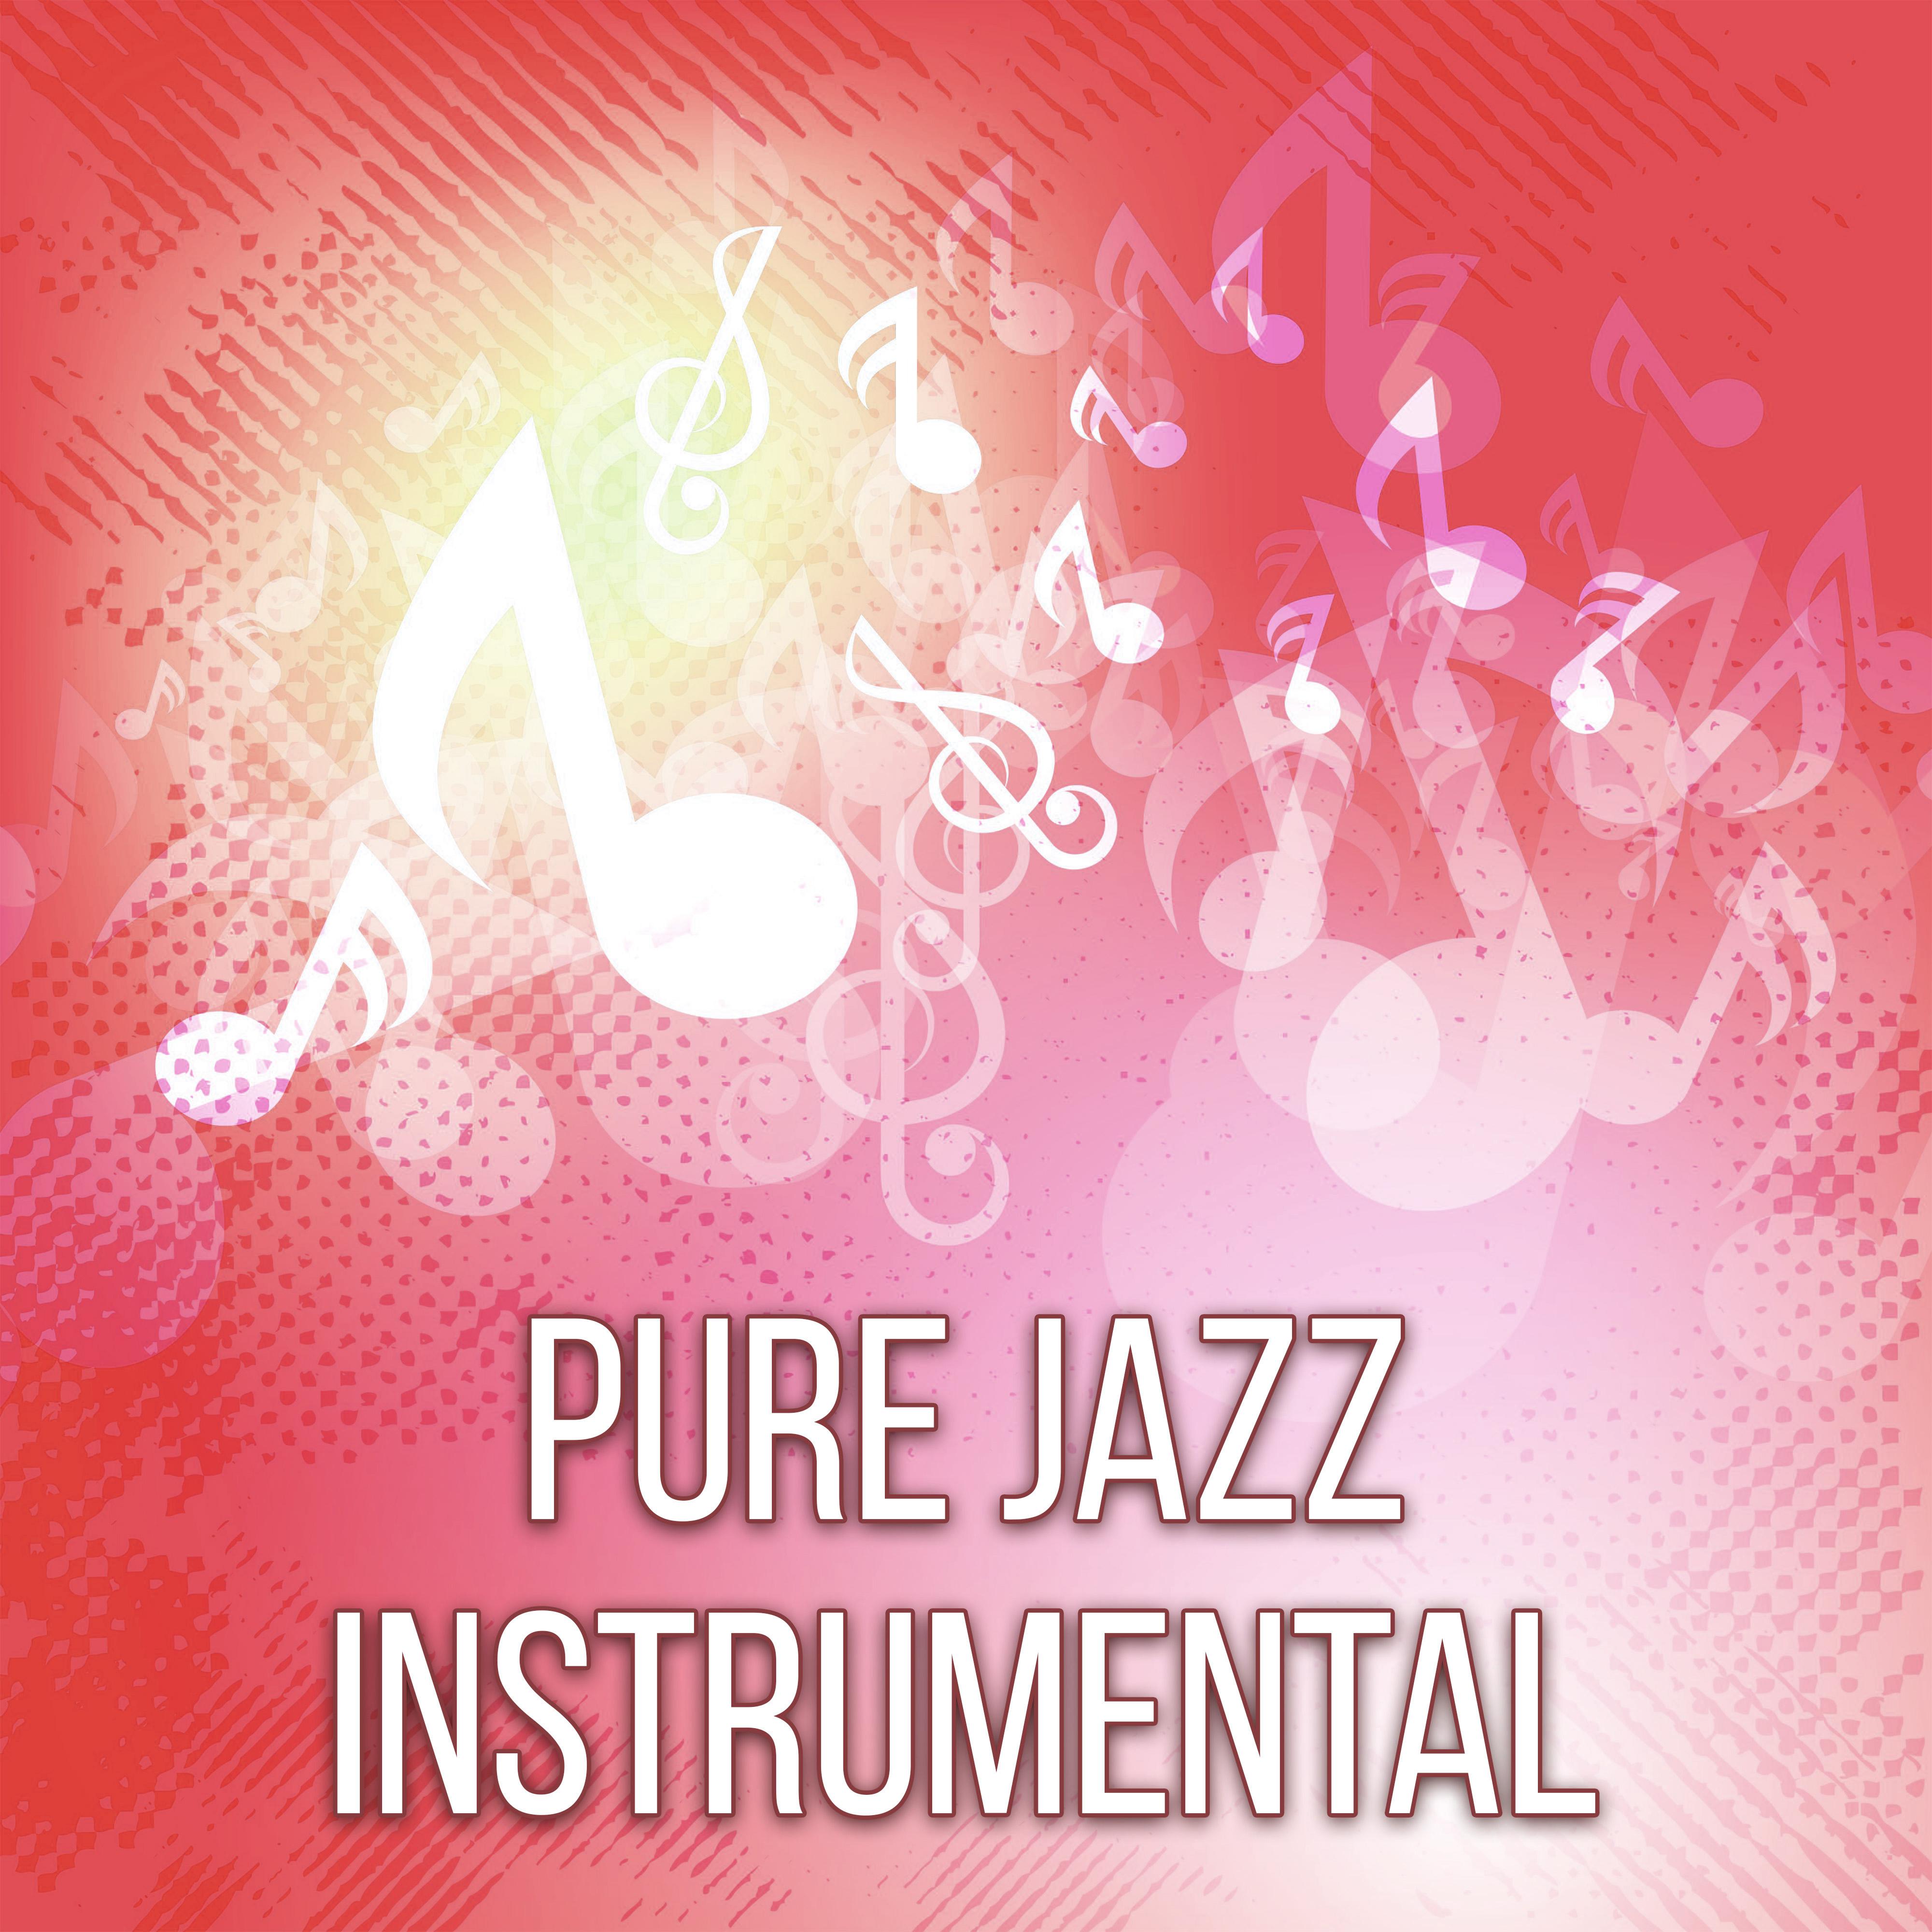 Pure Jazz Instrumental  Ambient Piano Jazz, Instrumental Session, Soothing Jazz Lounge, Finest Selected